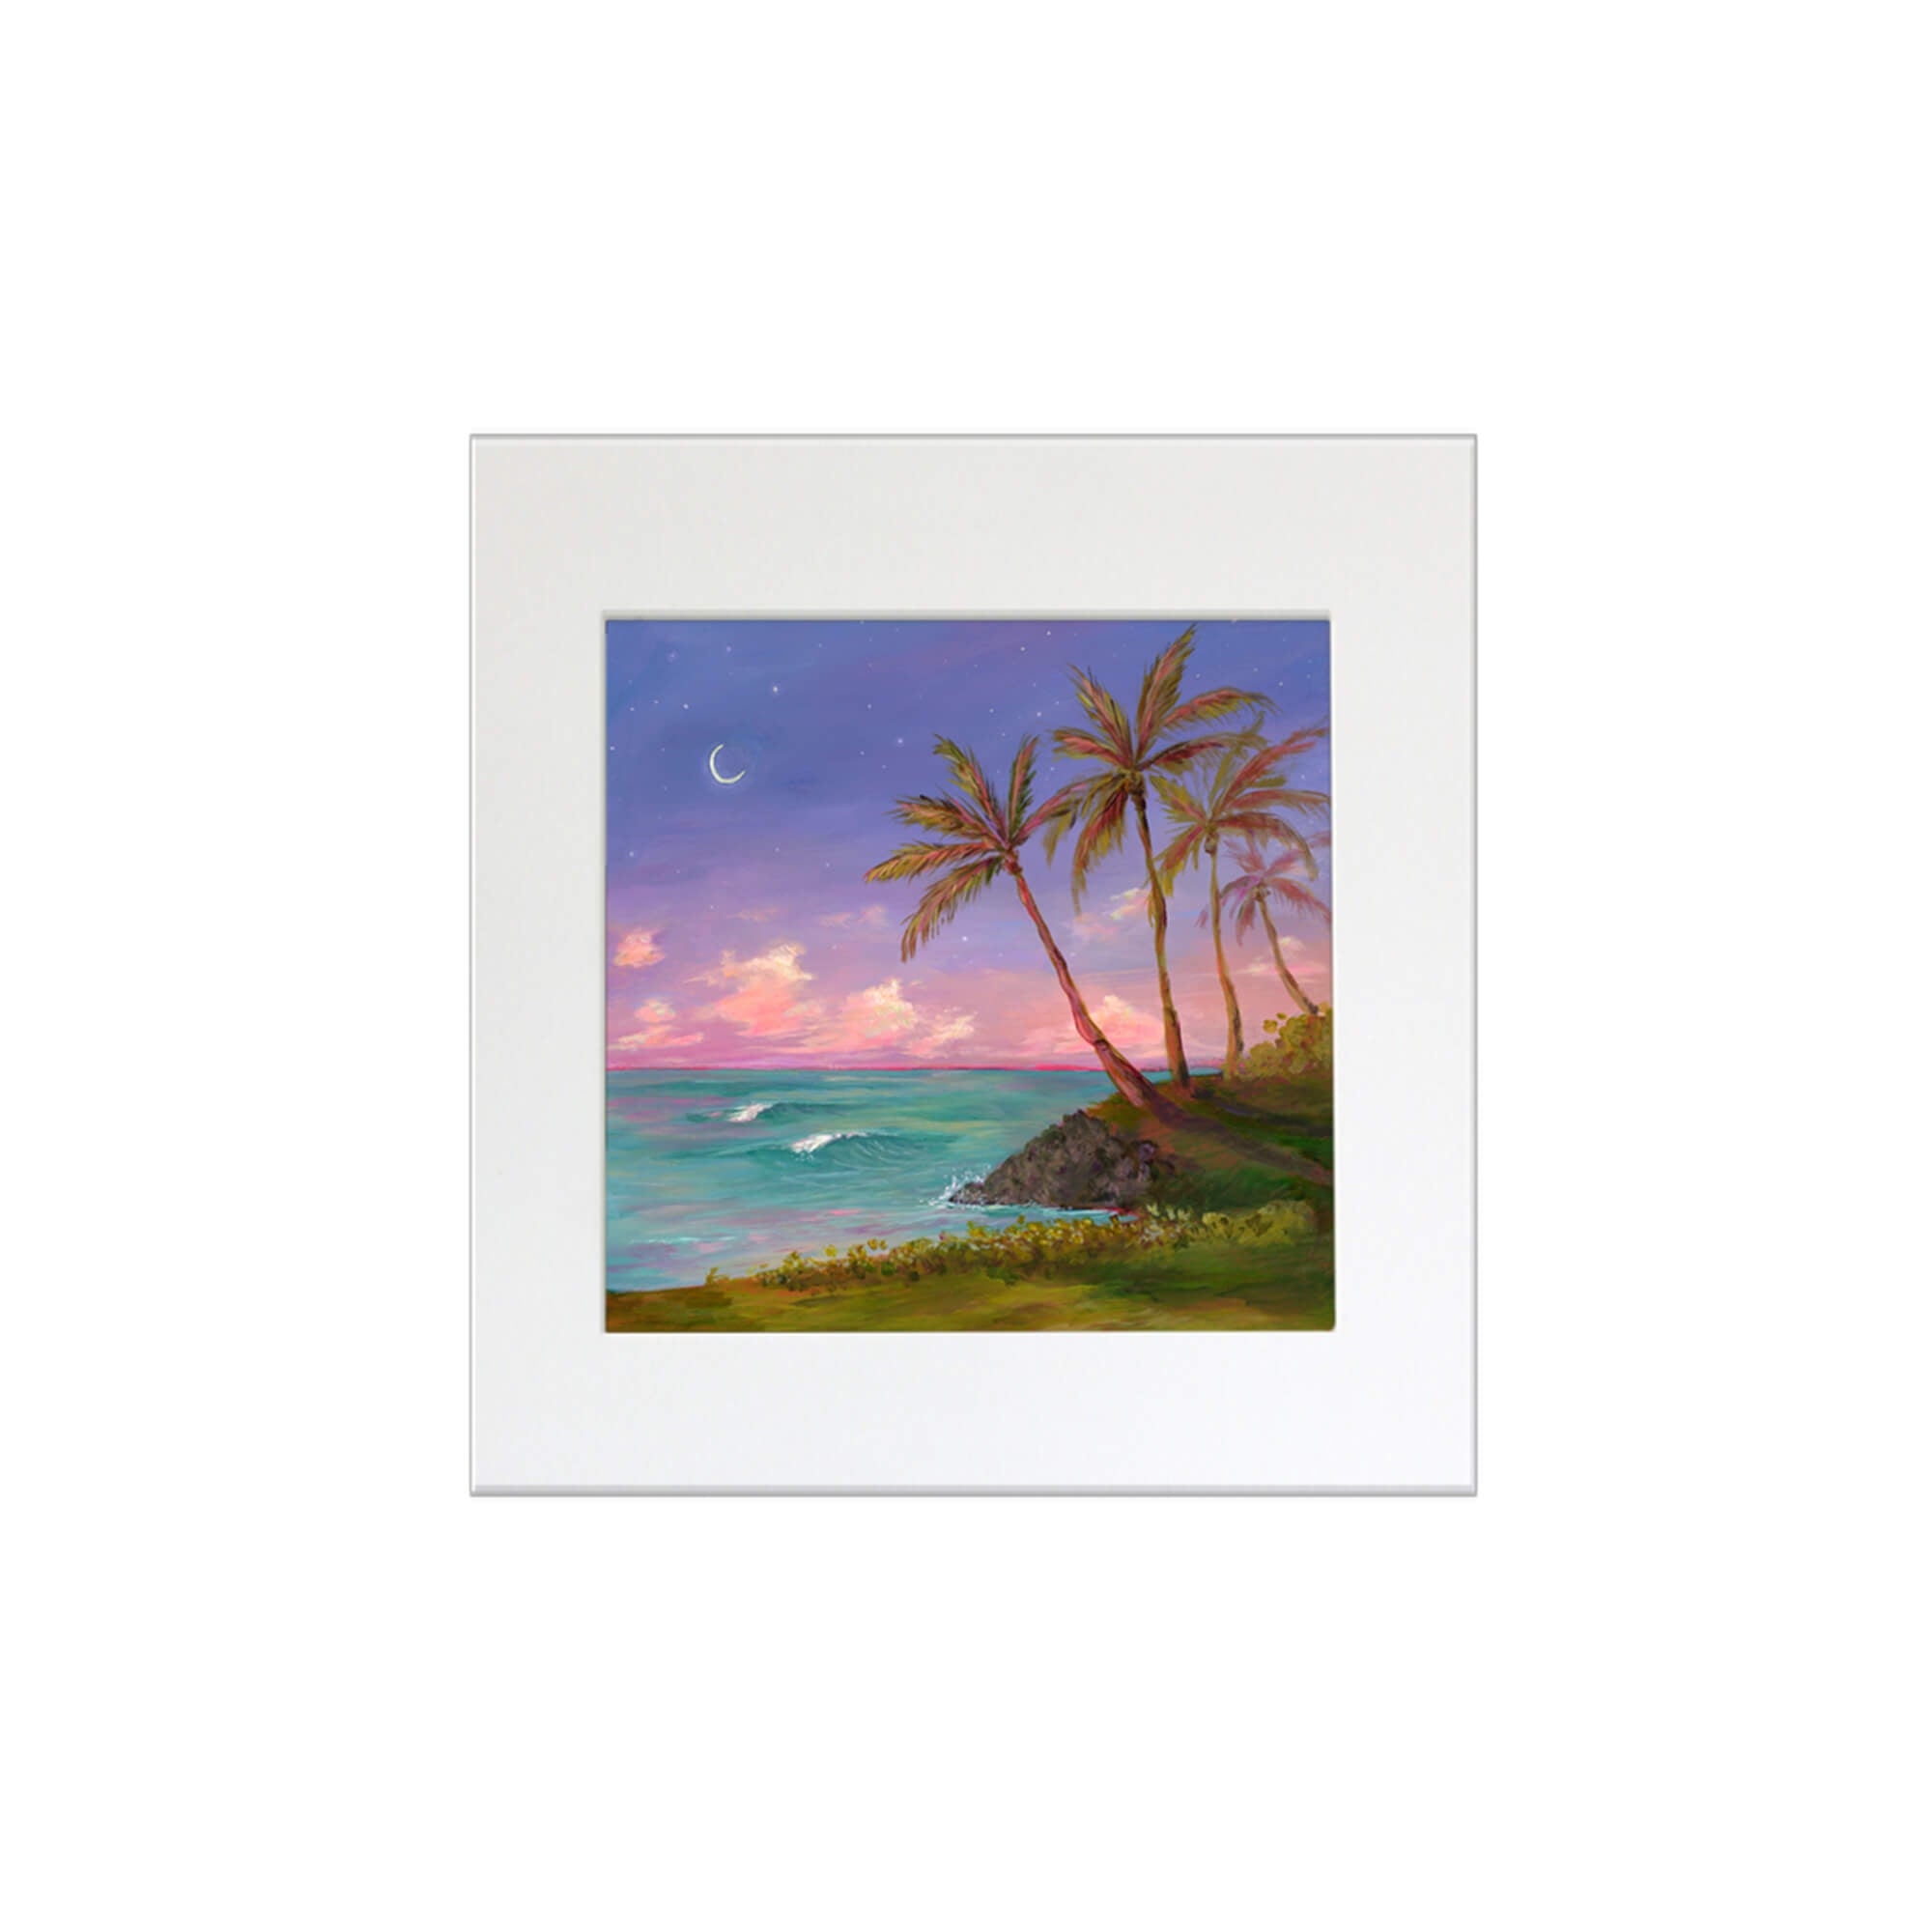 A sunset view from a cliff by Hawaii artist Lindsay Wilkins